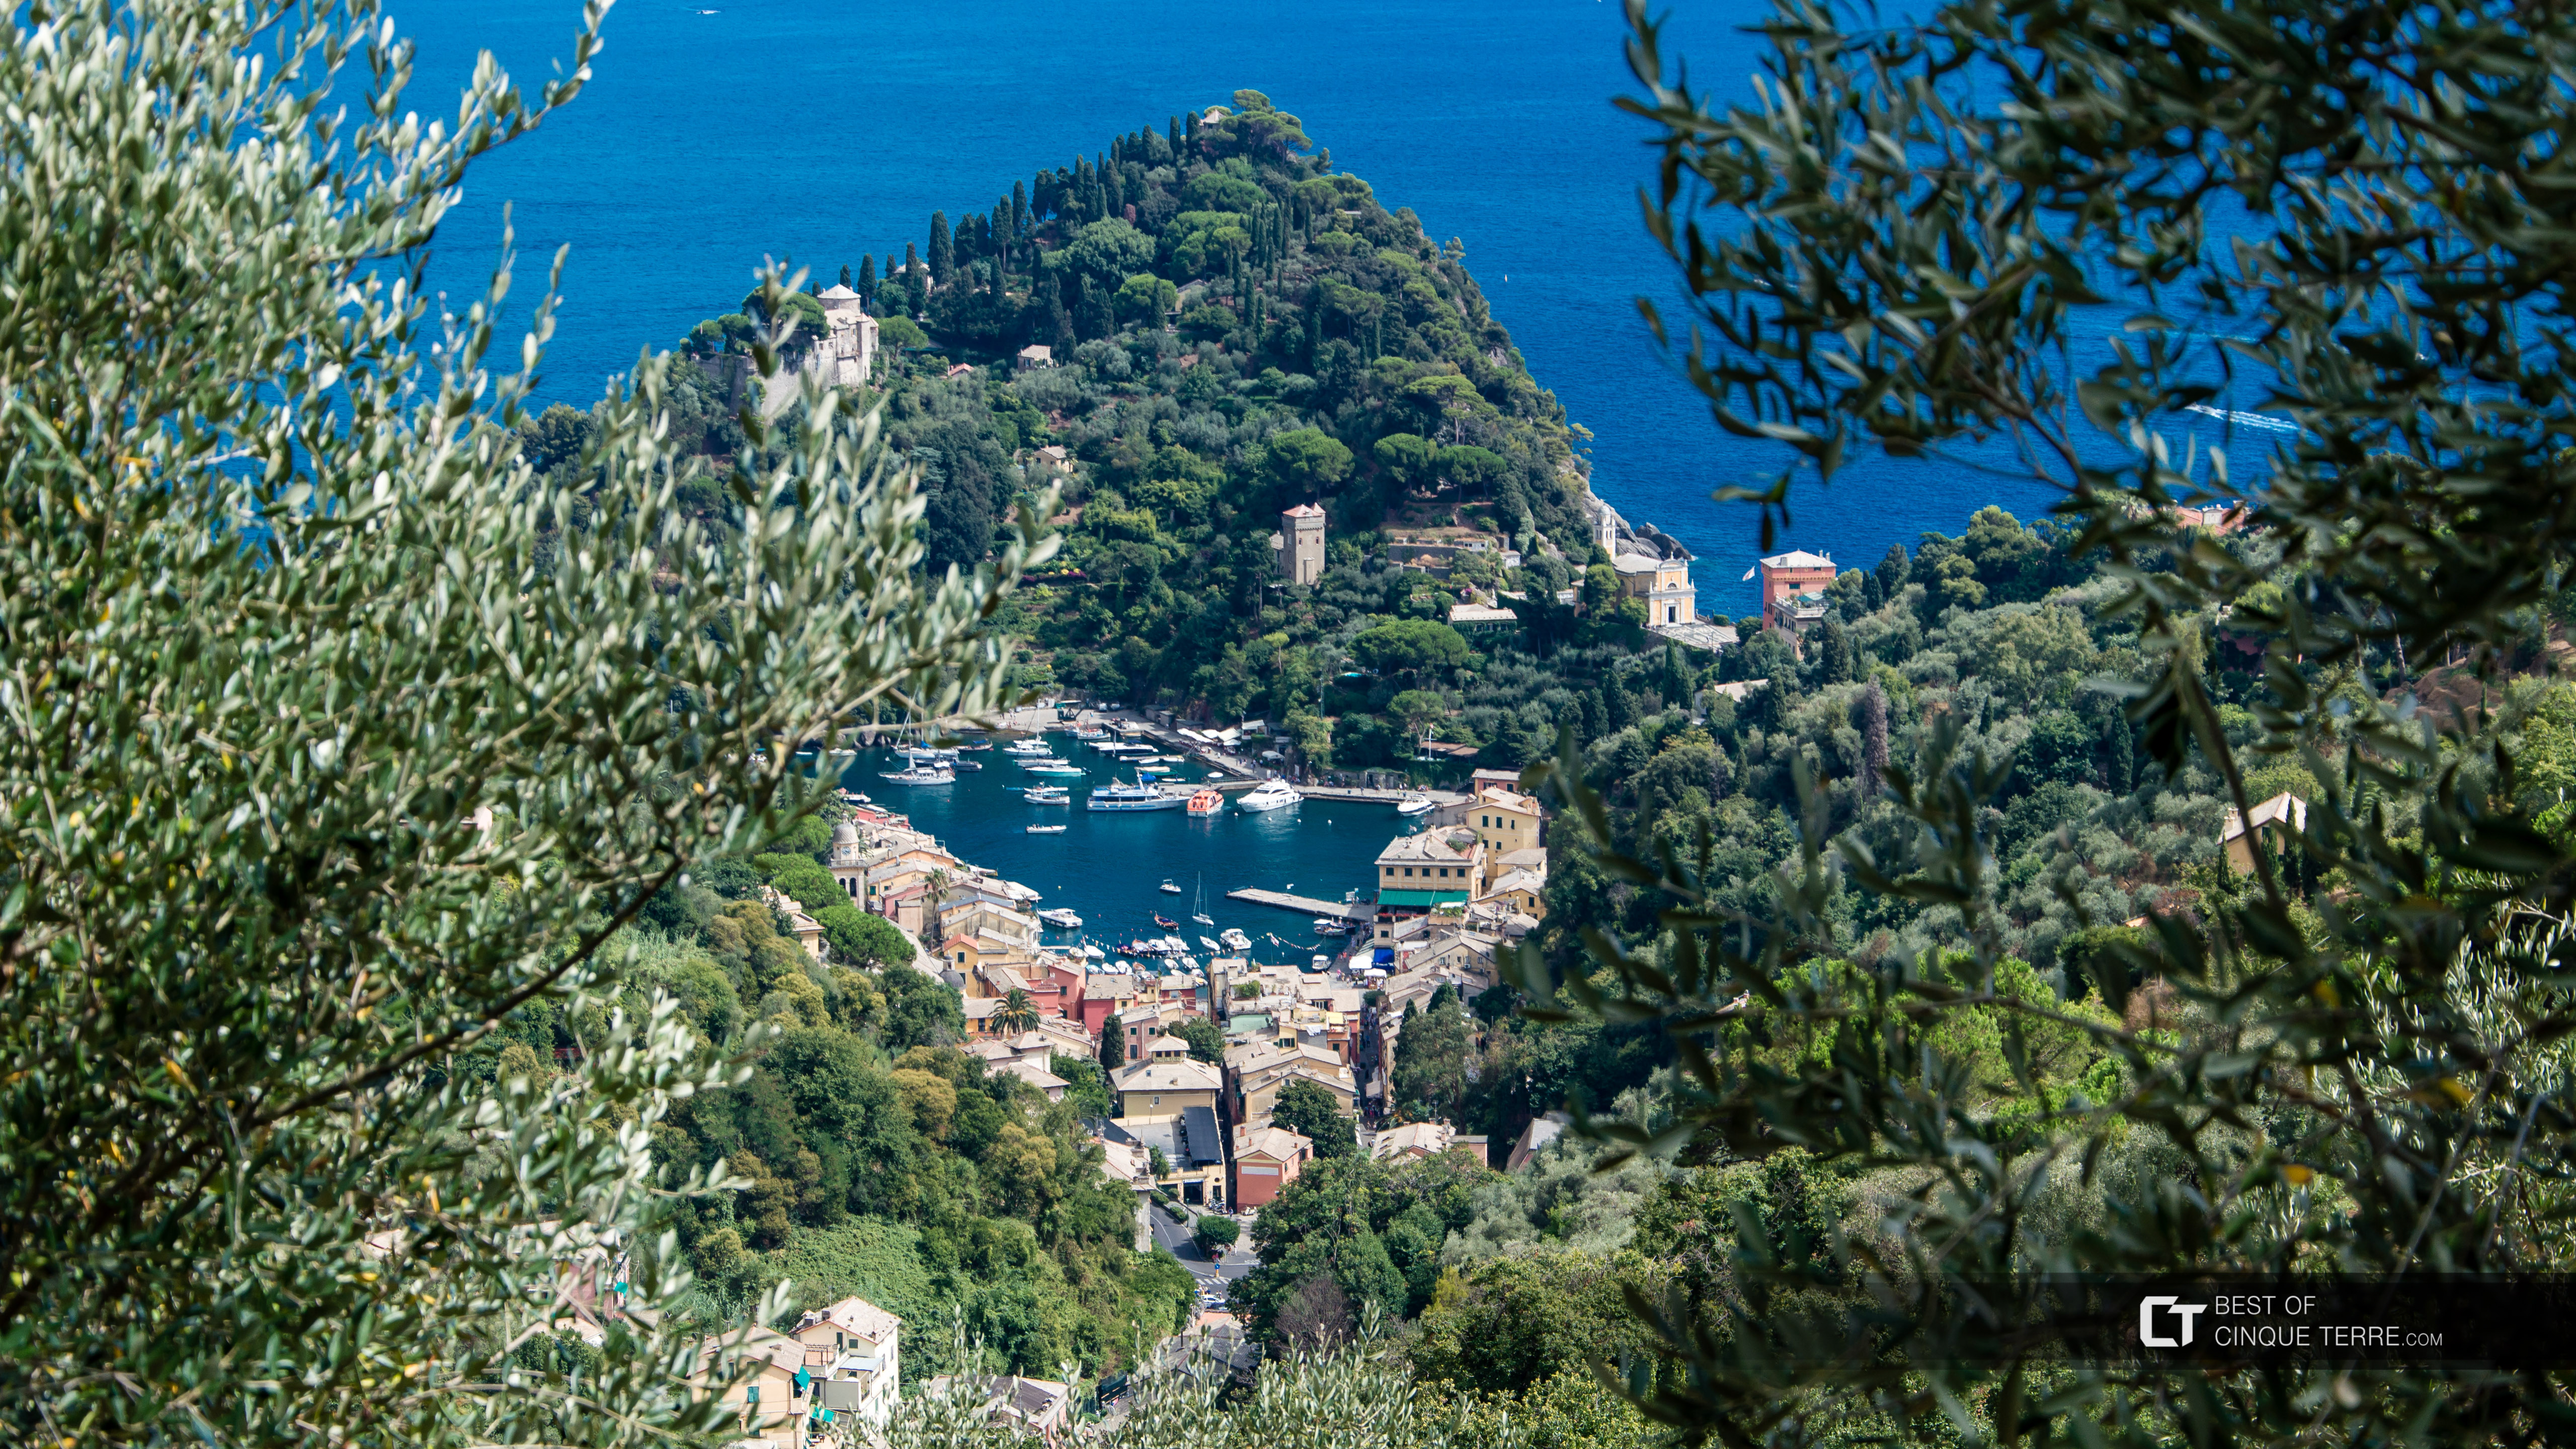 The view of the village from the trail to San Fruttuoso Abbey, Portofino, Italy